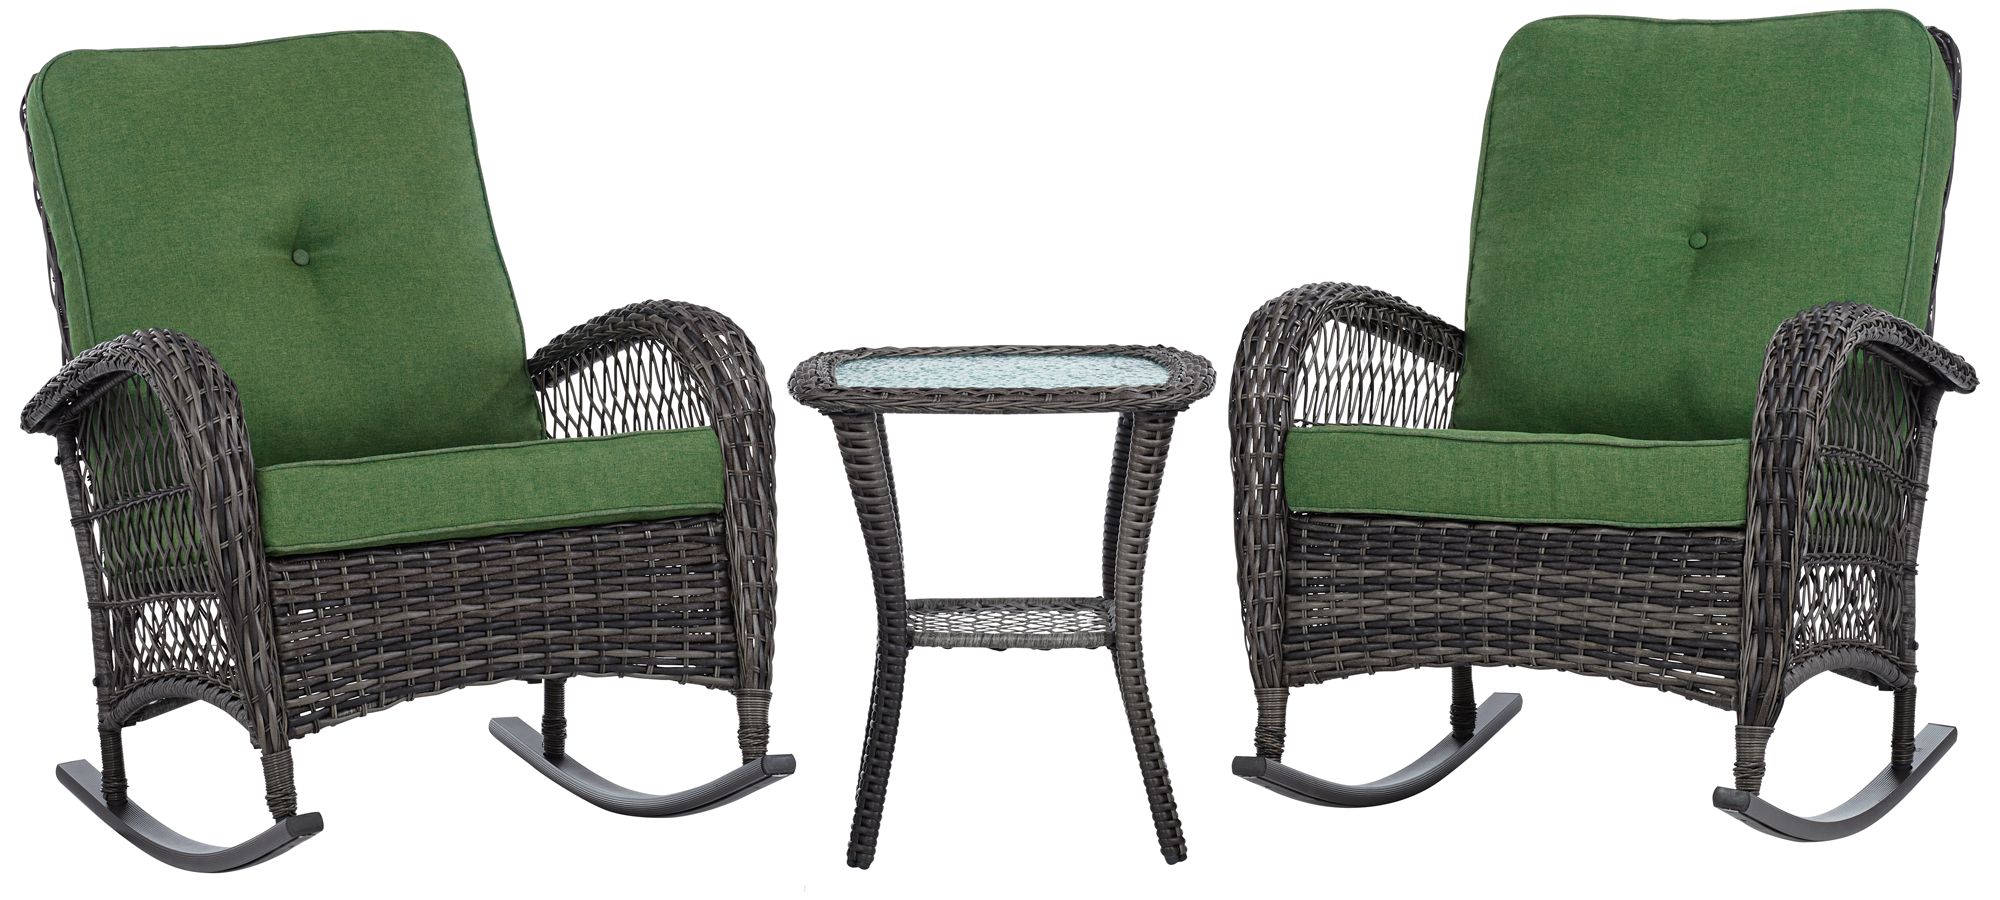 Teal Island Designs Madden 3 Piece Green and Rattan Outdoor Rocking Chair Set With Coffee Table - image 2 of 10